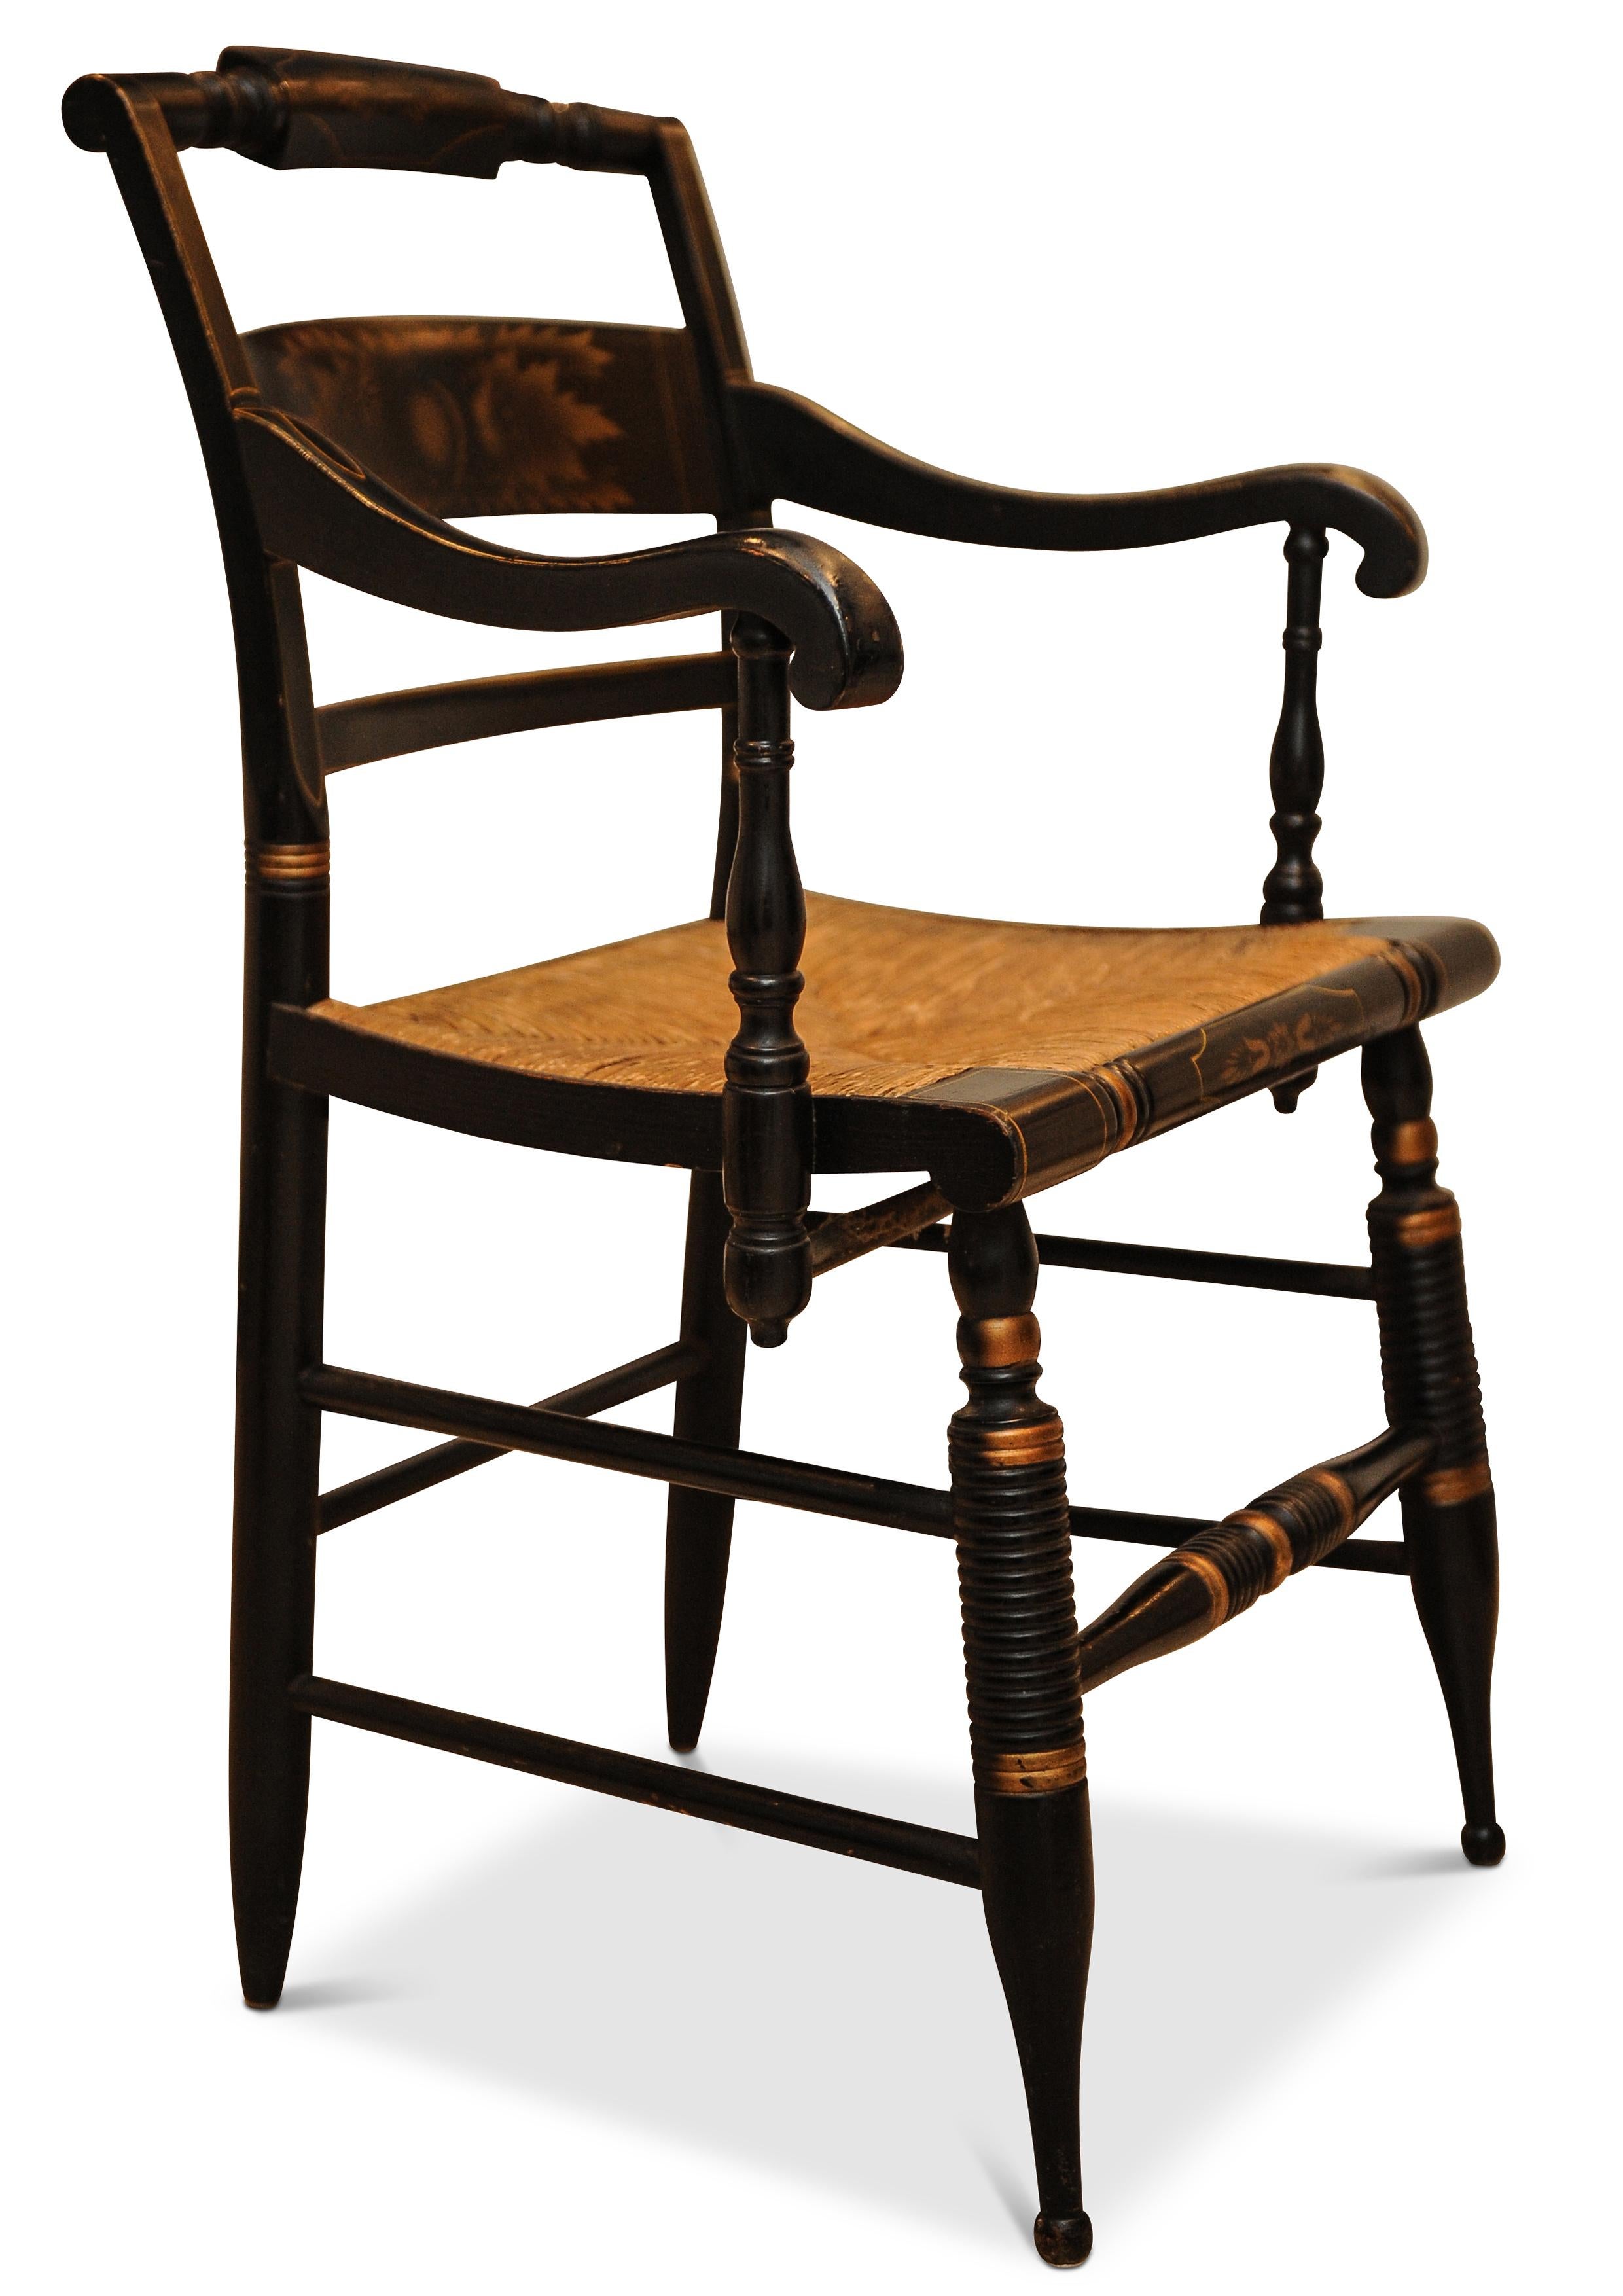 19th Century Antique American Maple Gilt & Ebonised Frame & Rush Seat Chair For Sale